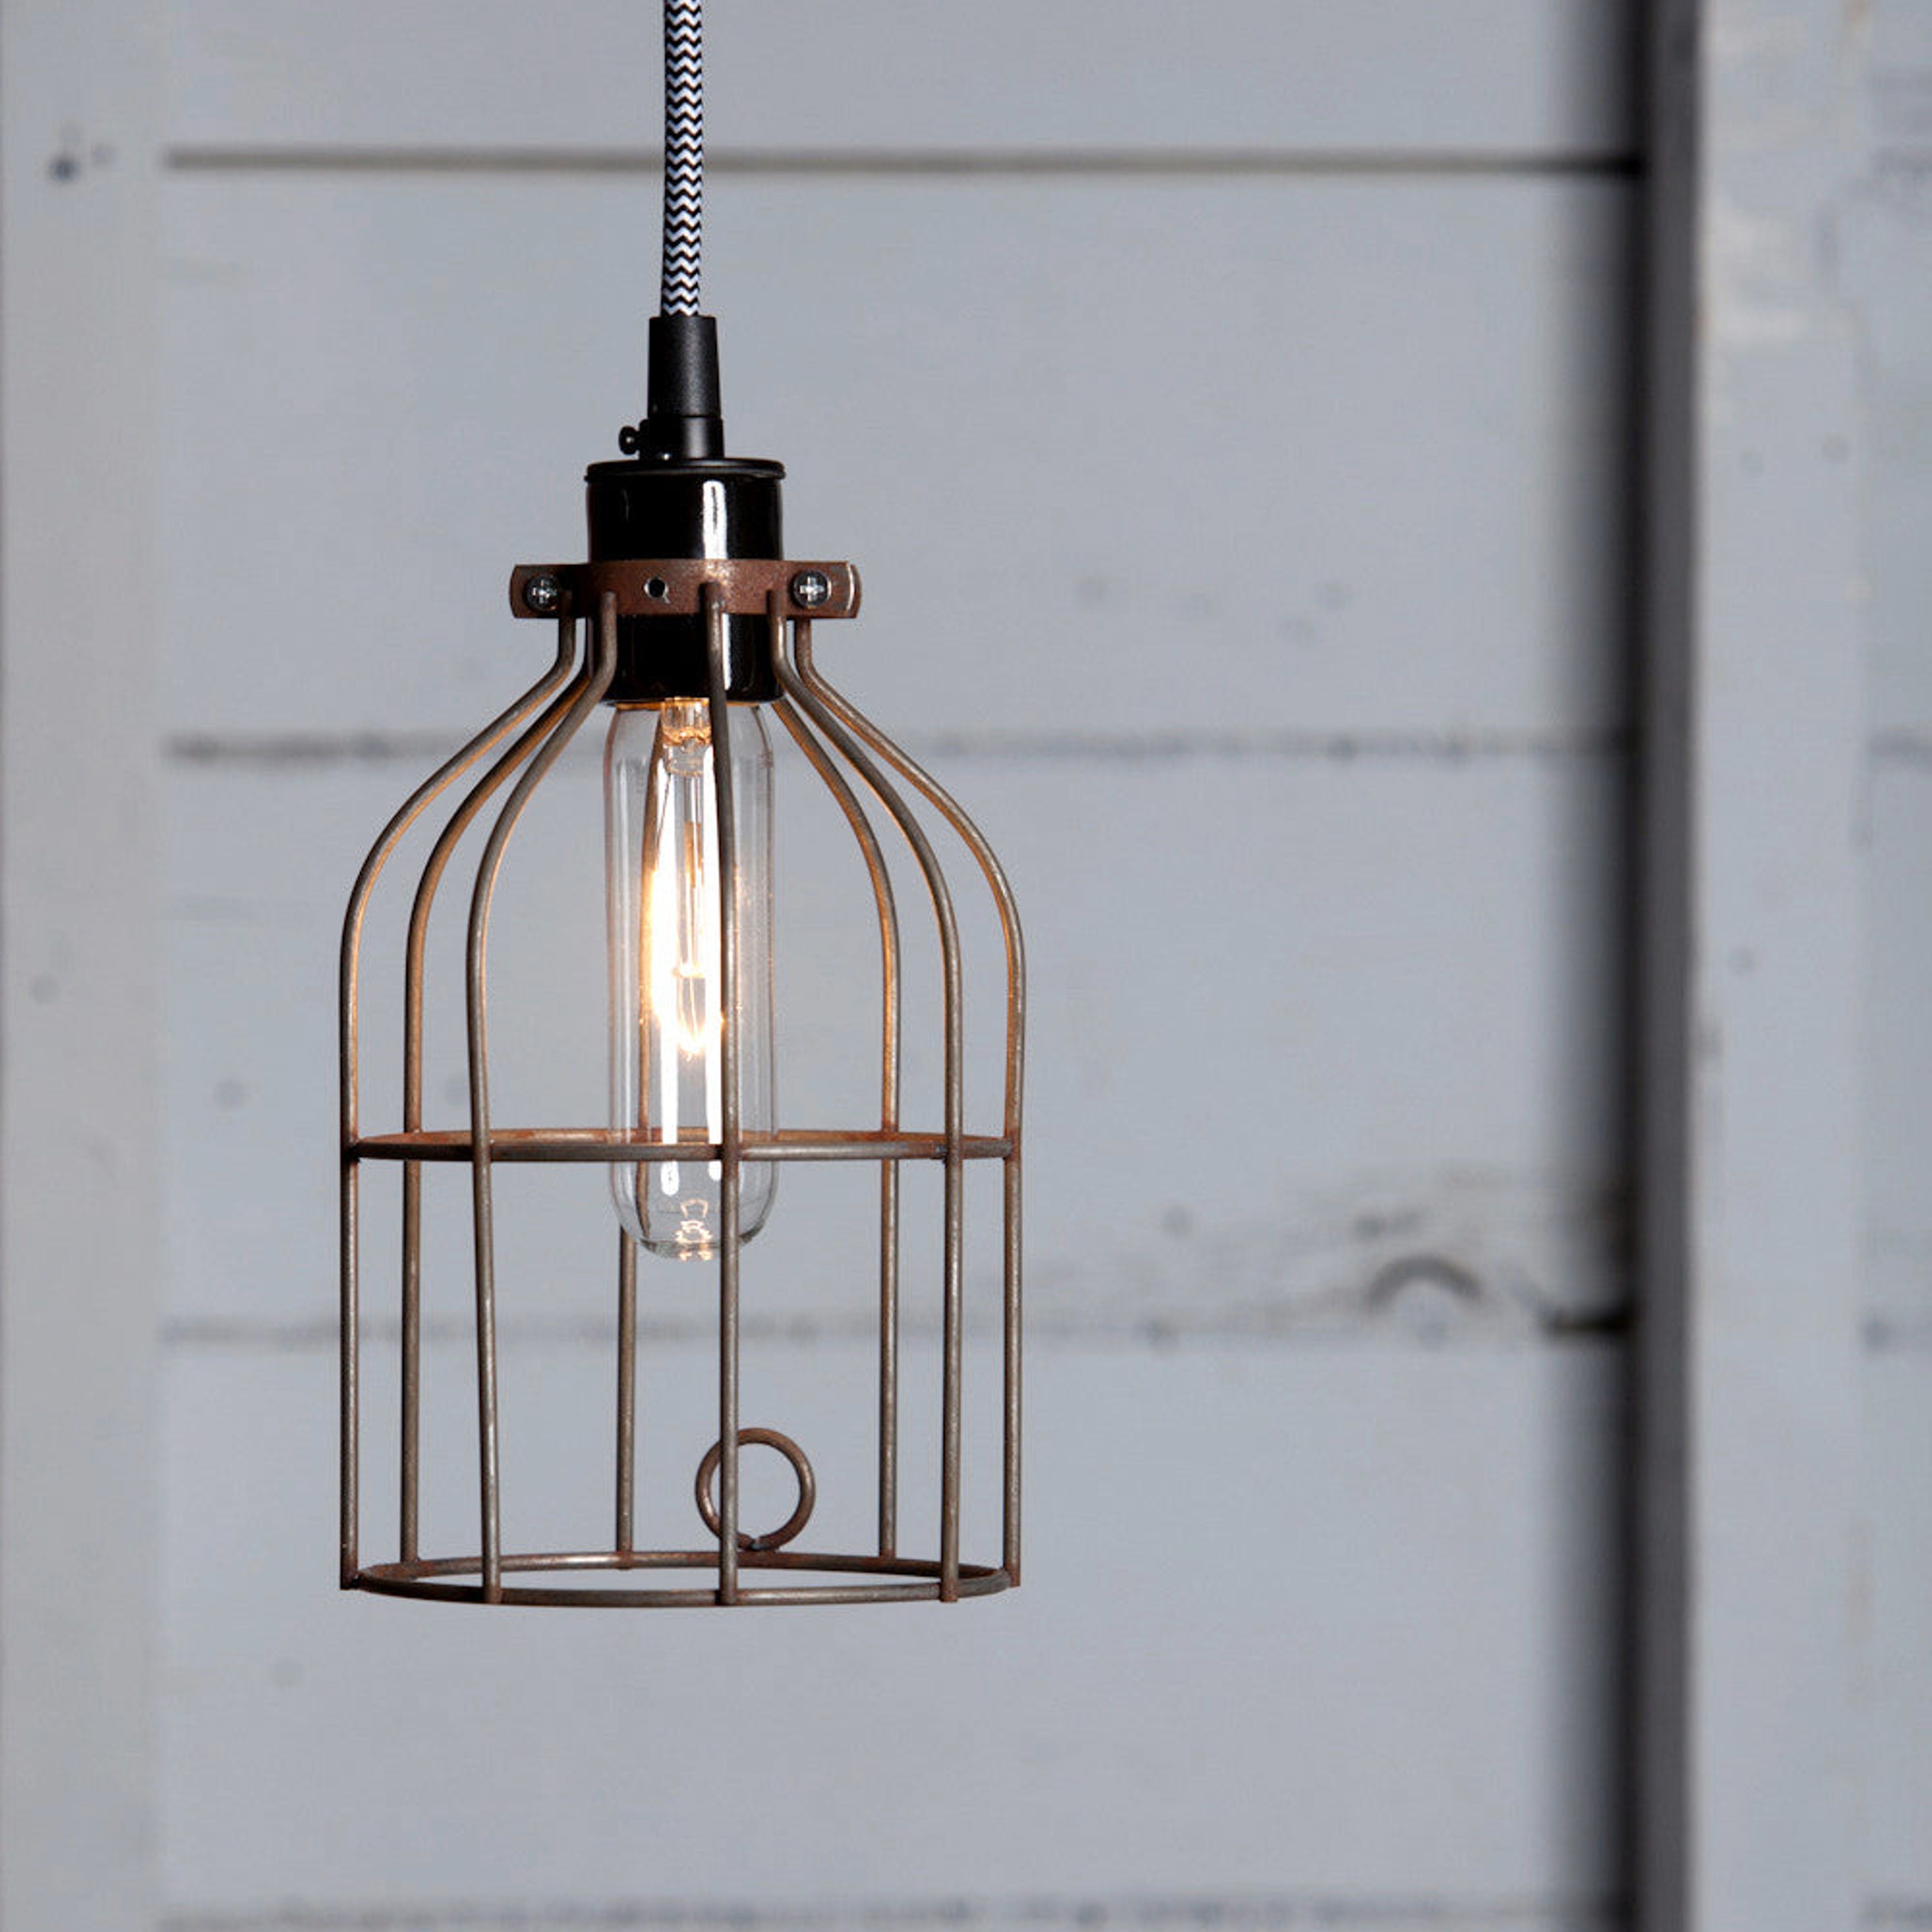 Industrial Pendant Lighting - Vintage Rusted Wire Cage Light